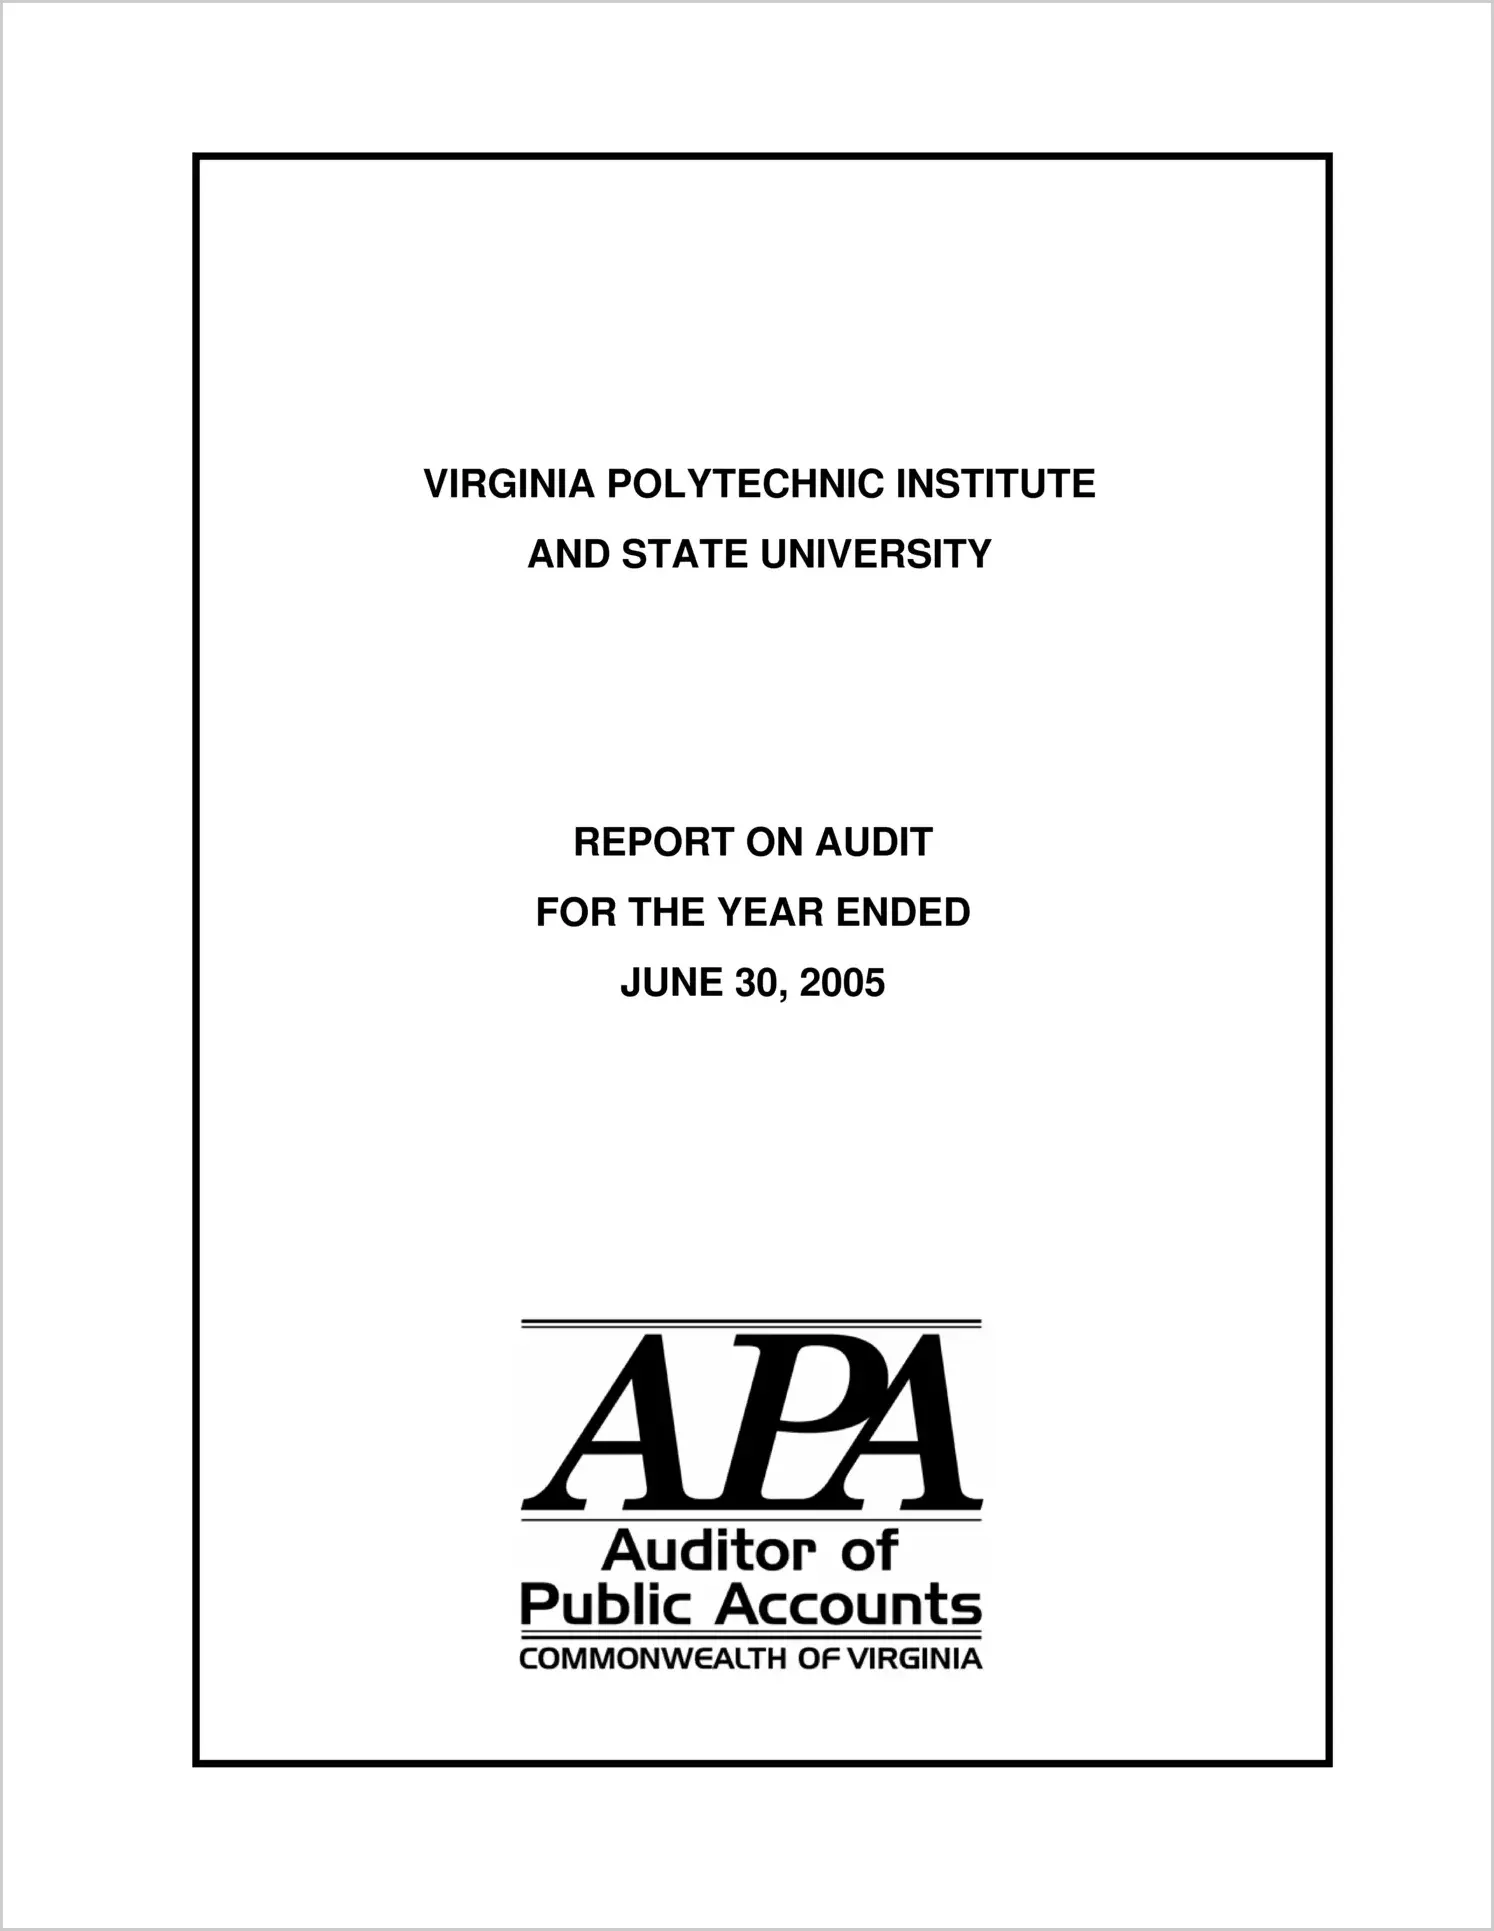 Virginia Polytechnic Institute and State University for the year ended June 30, 2005